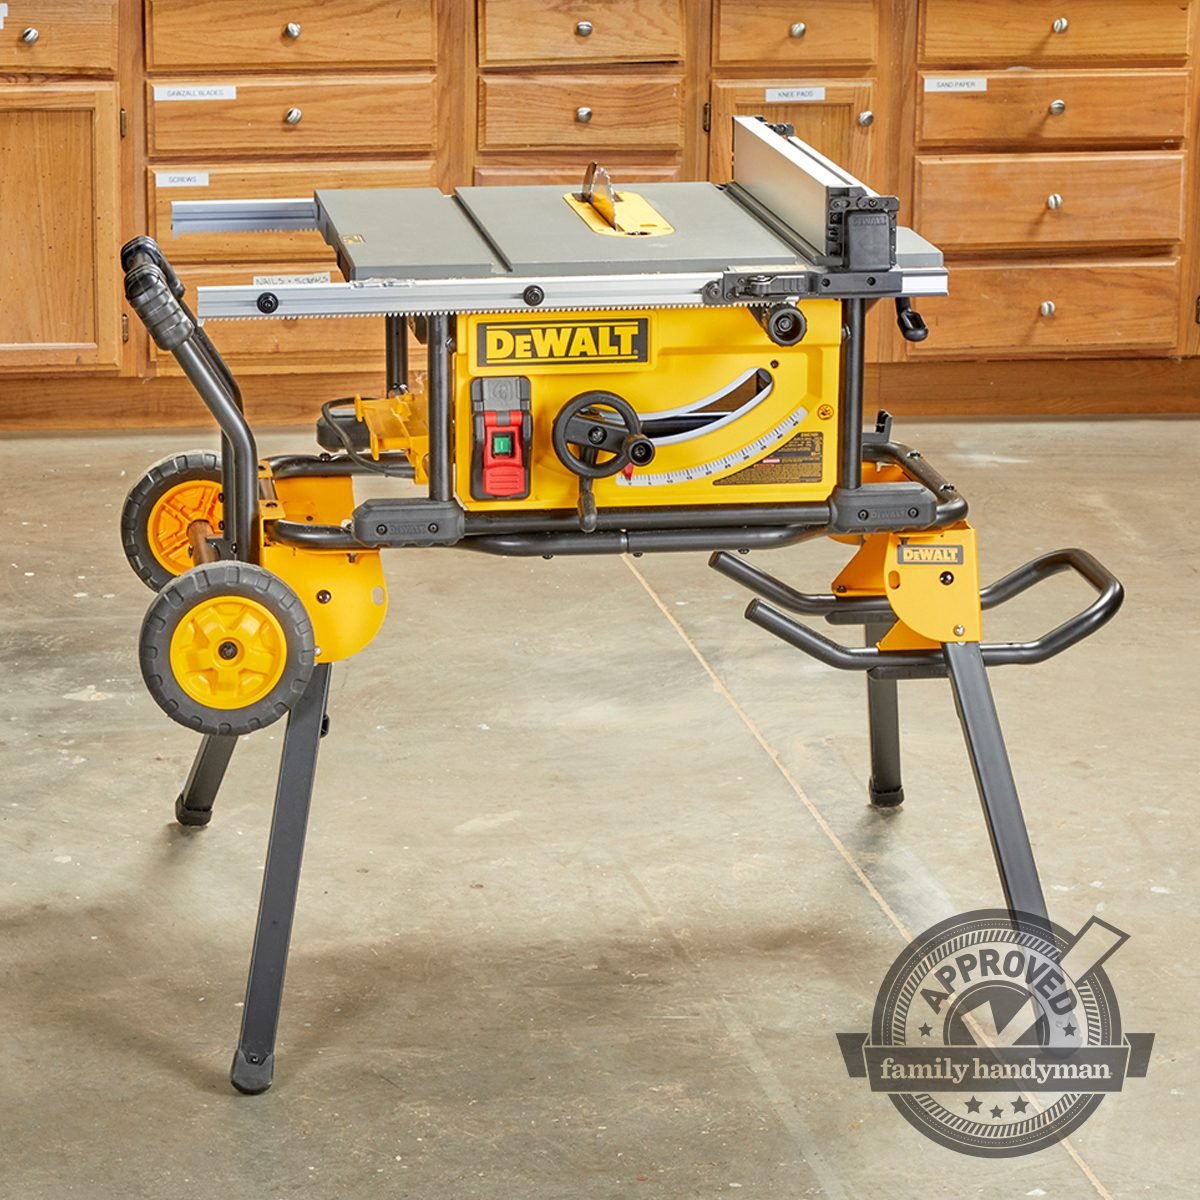 DeWalt 10-Inch Portable Table Saw Review - We Approve!